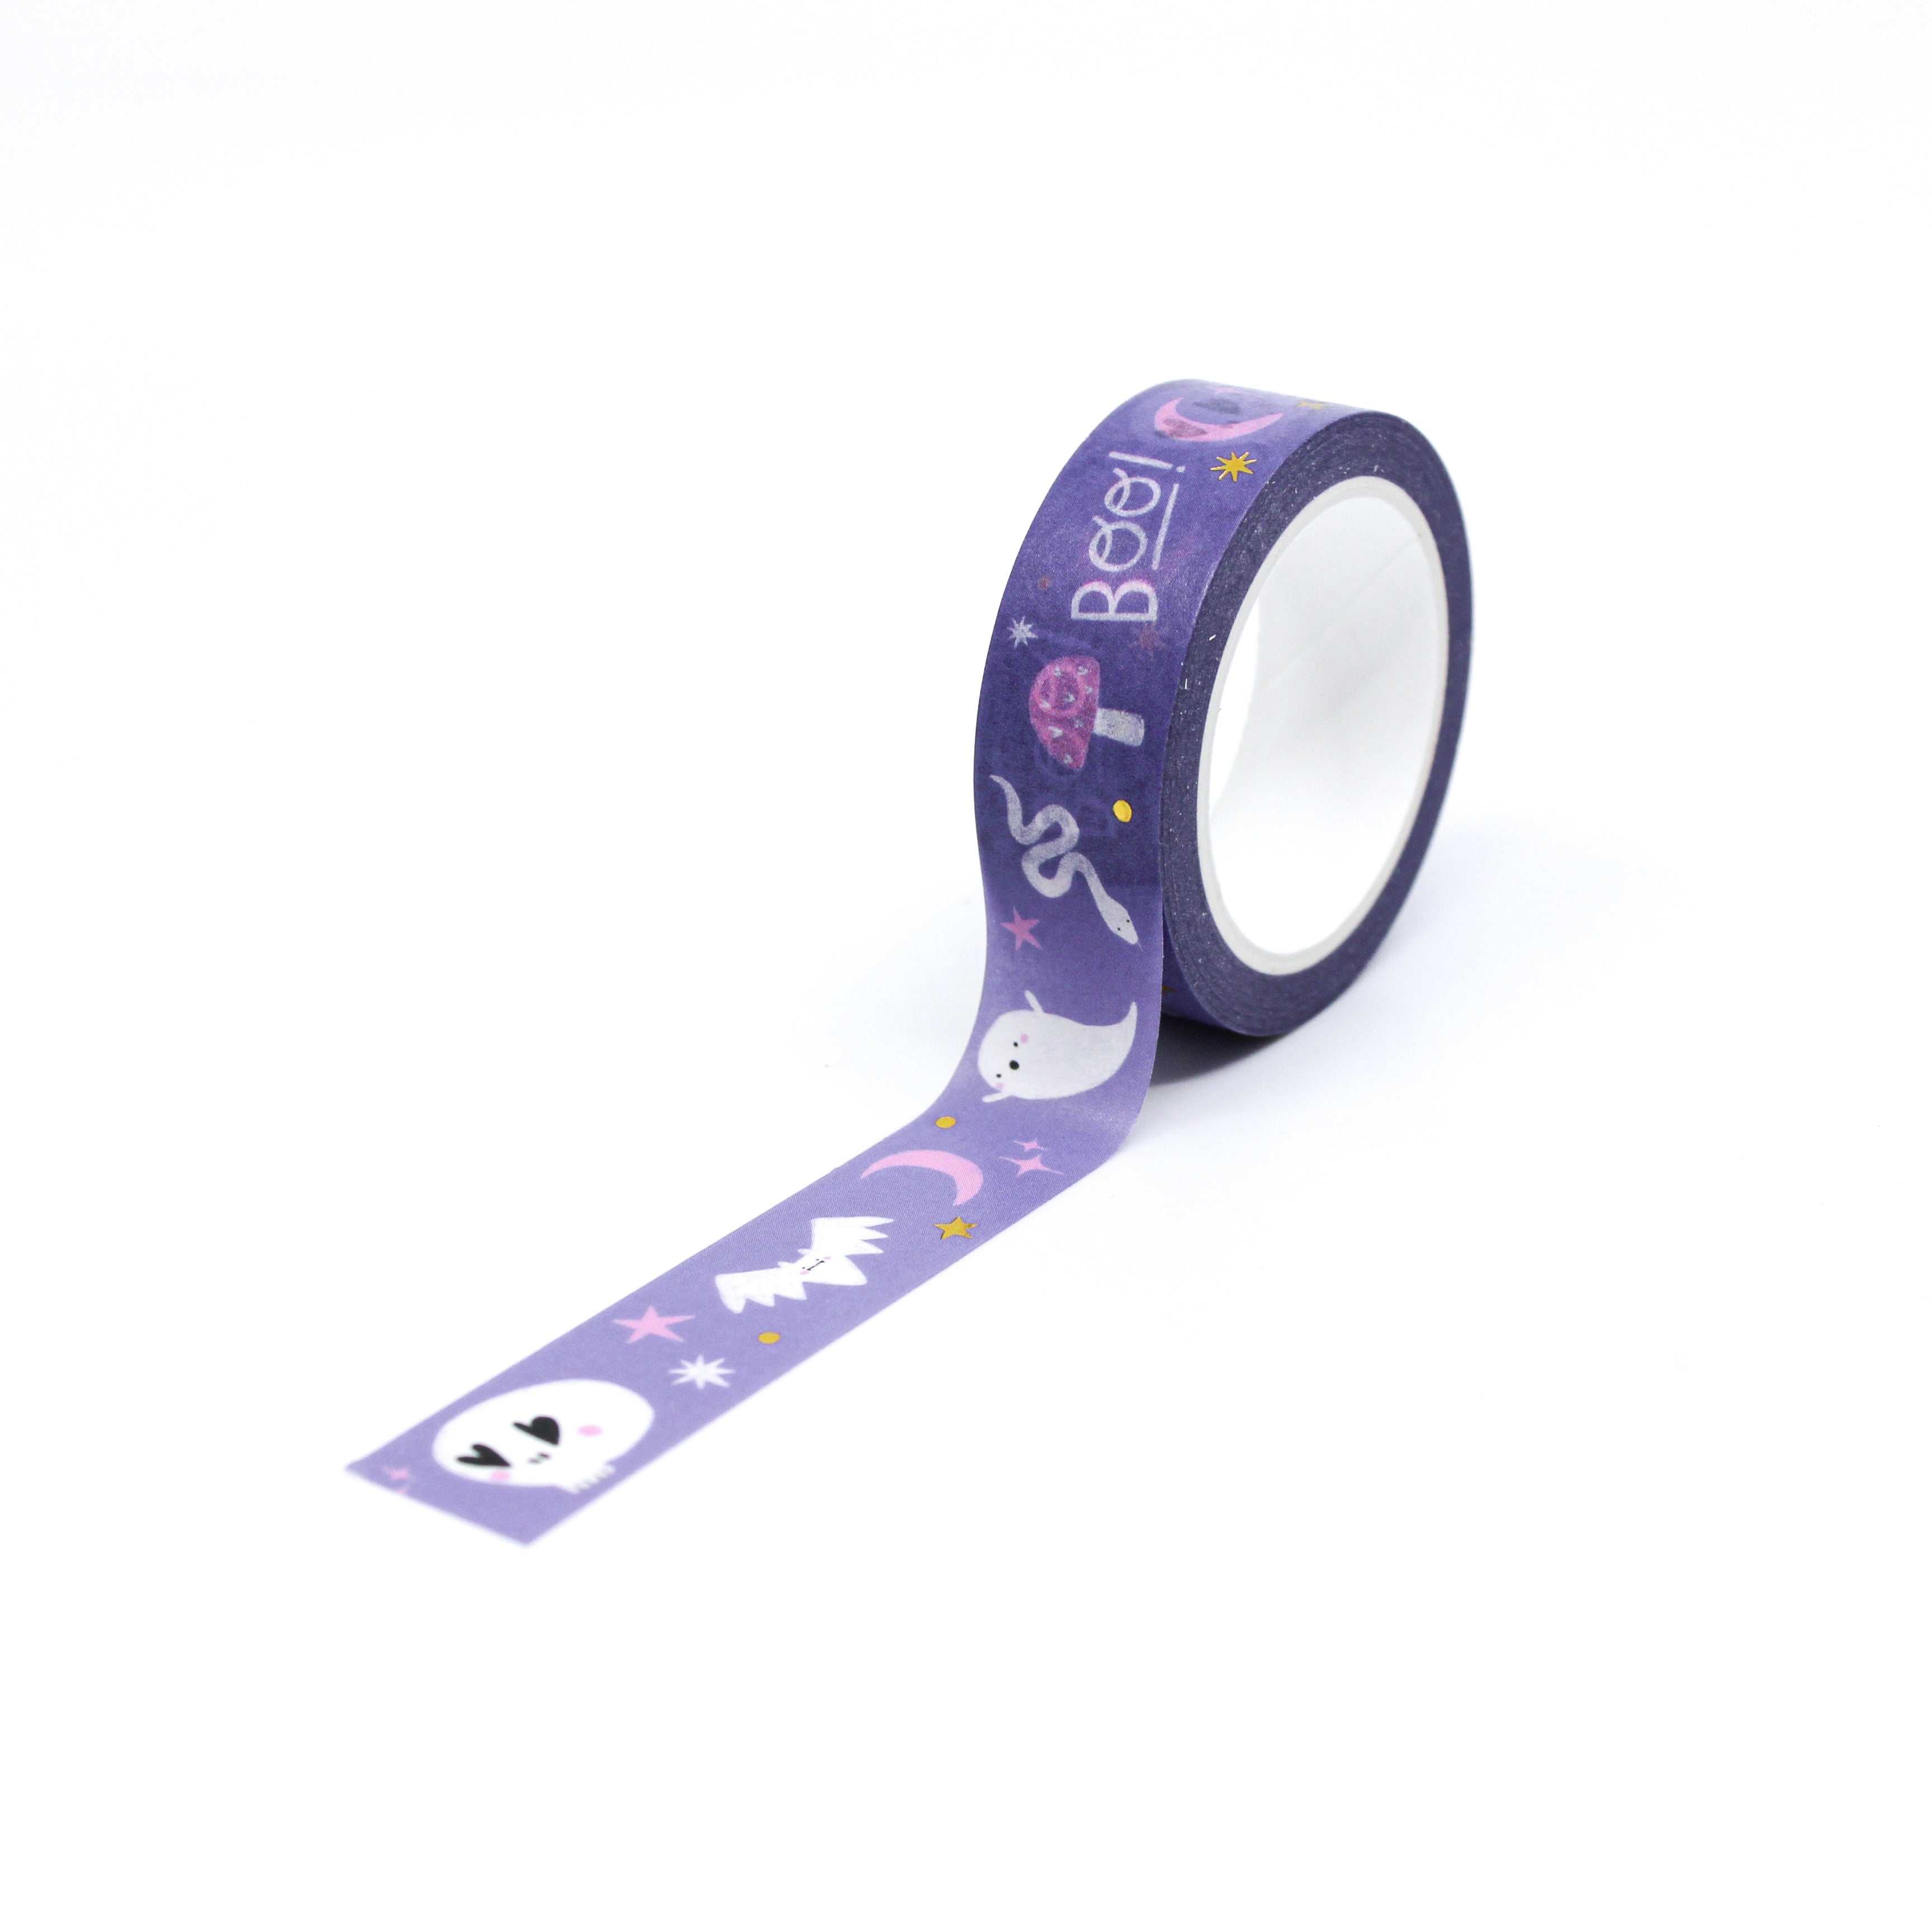 This is a full pattern repeat view of purple foil Halloween theme washi tape from BBB Supplies Craft Shop